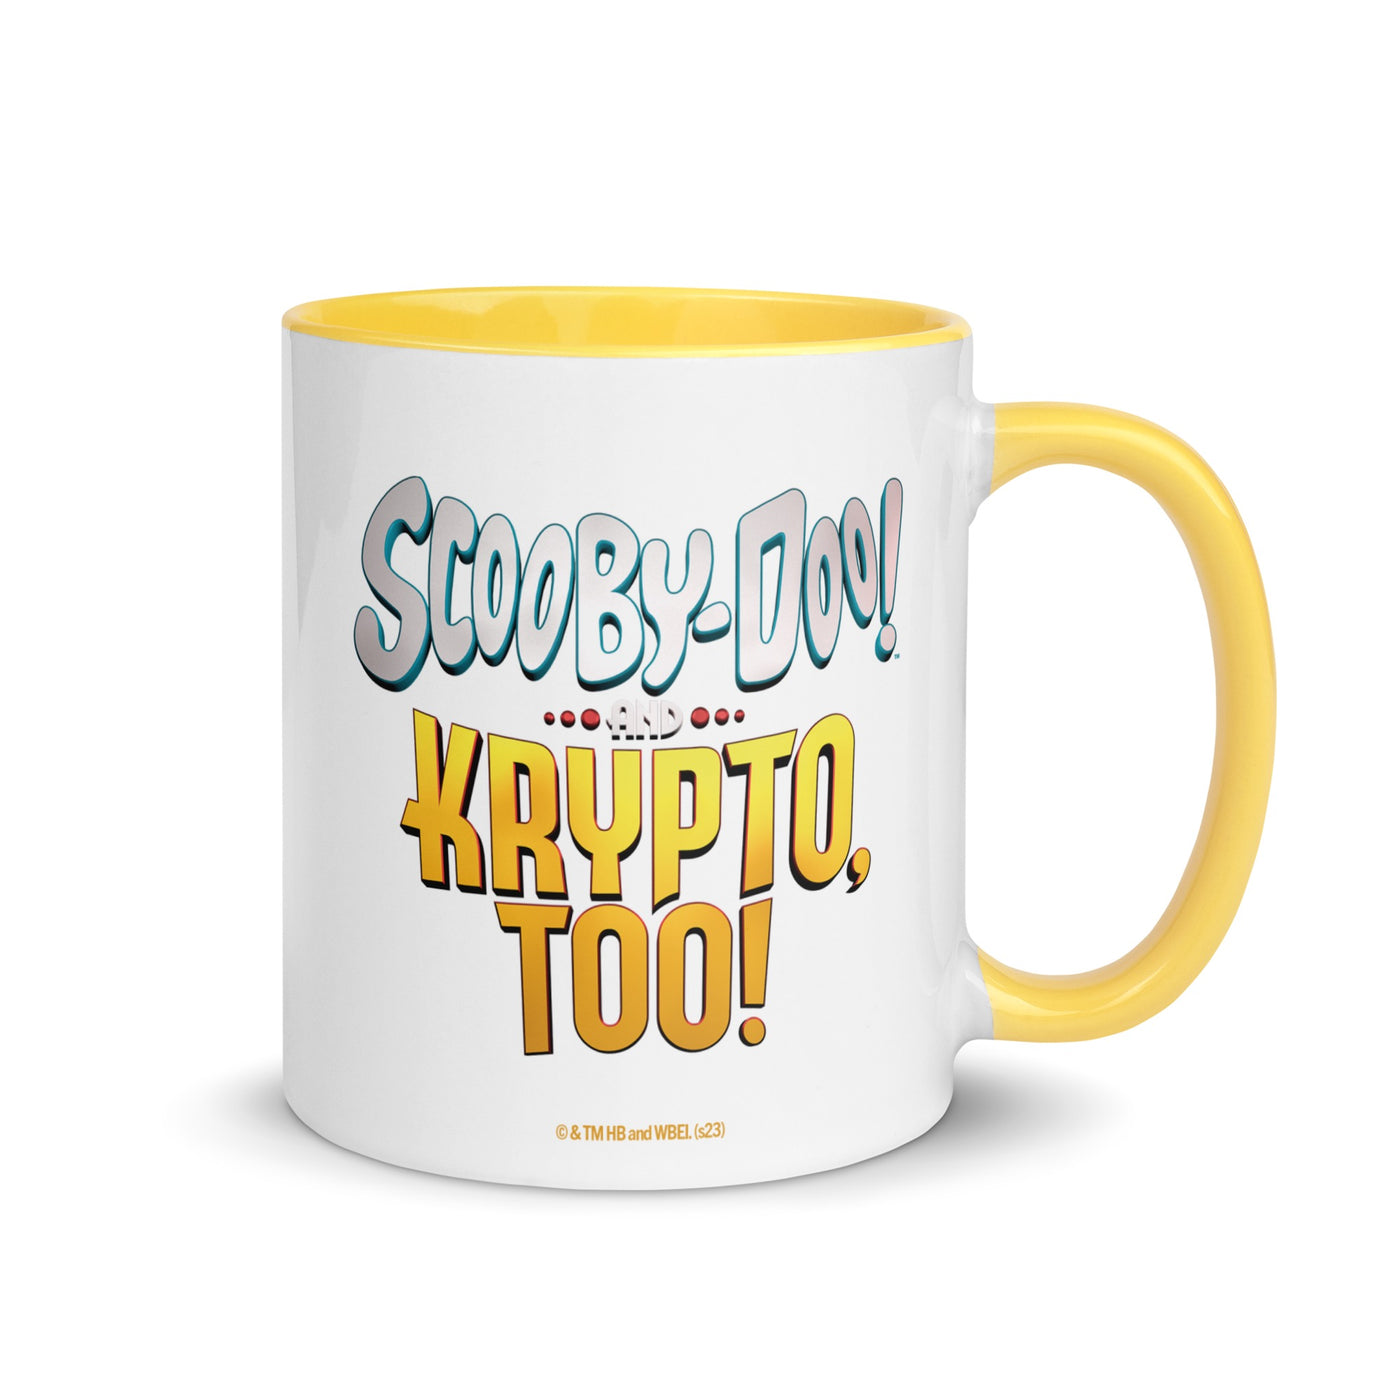 Scooby-Doo and Krypto, Too! Snack Time Two Tone Mug